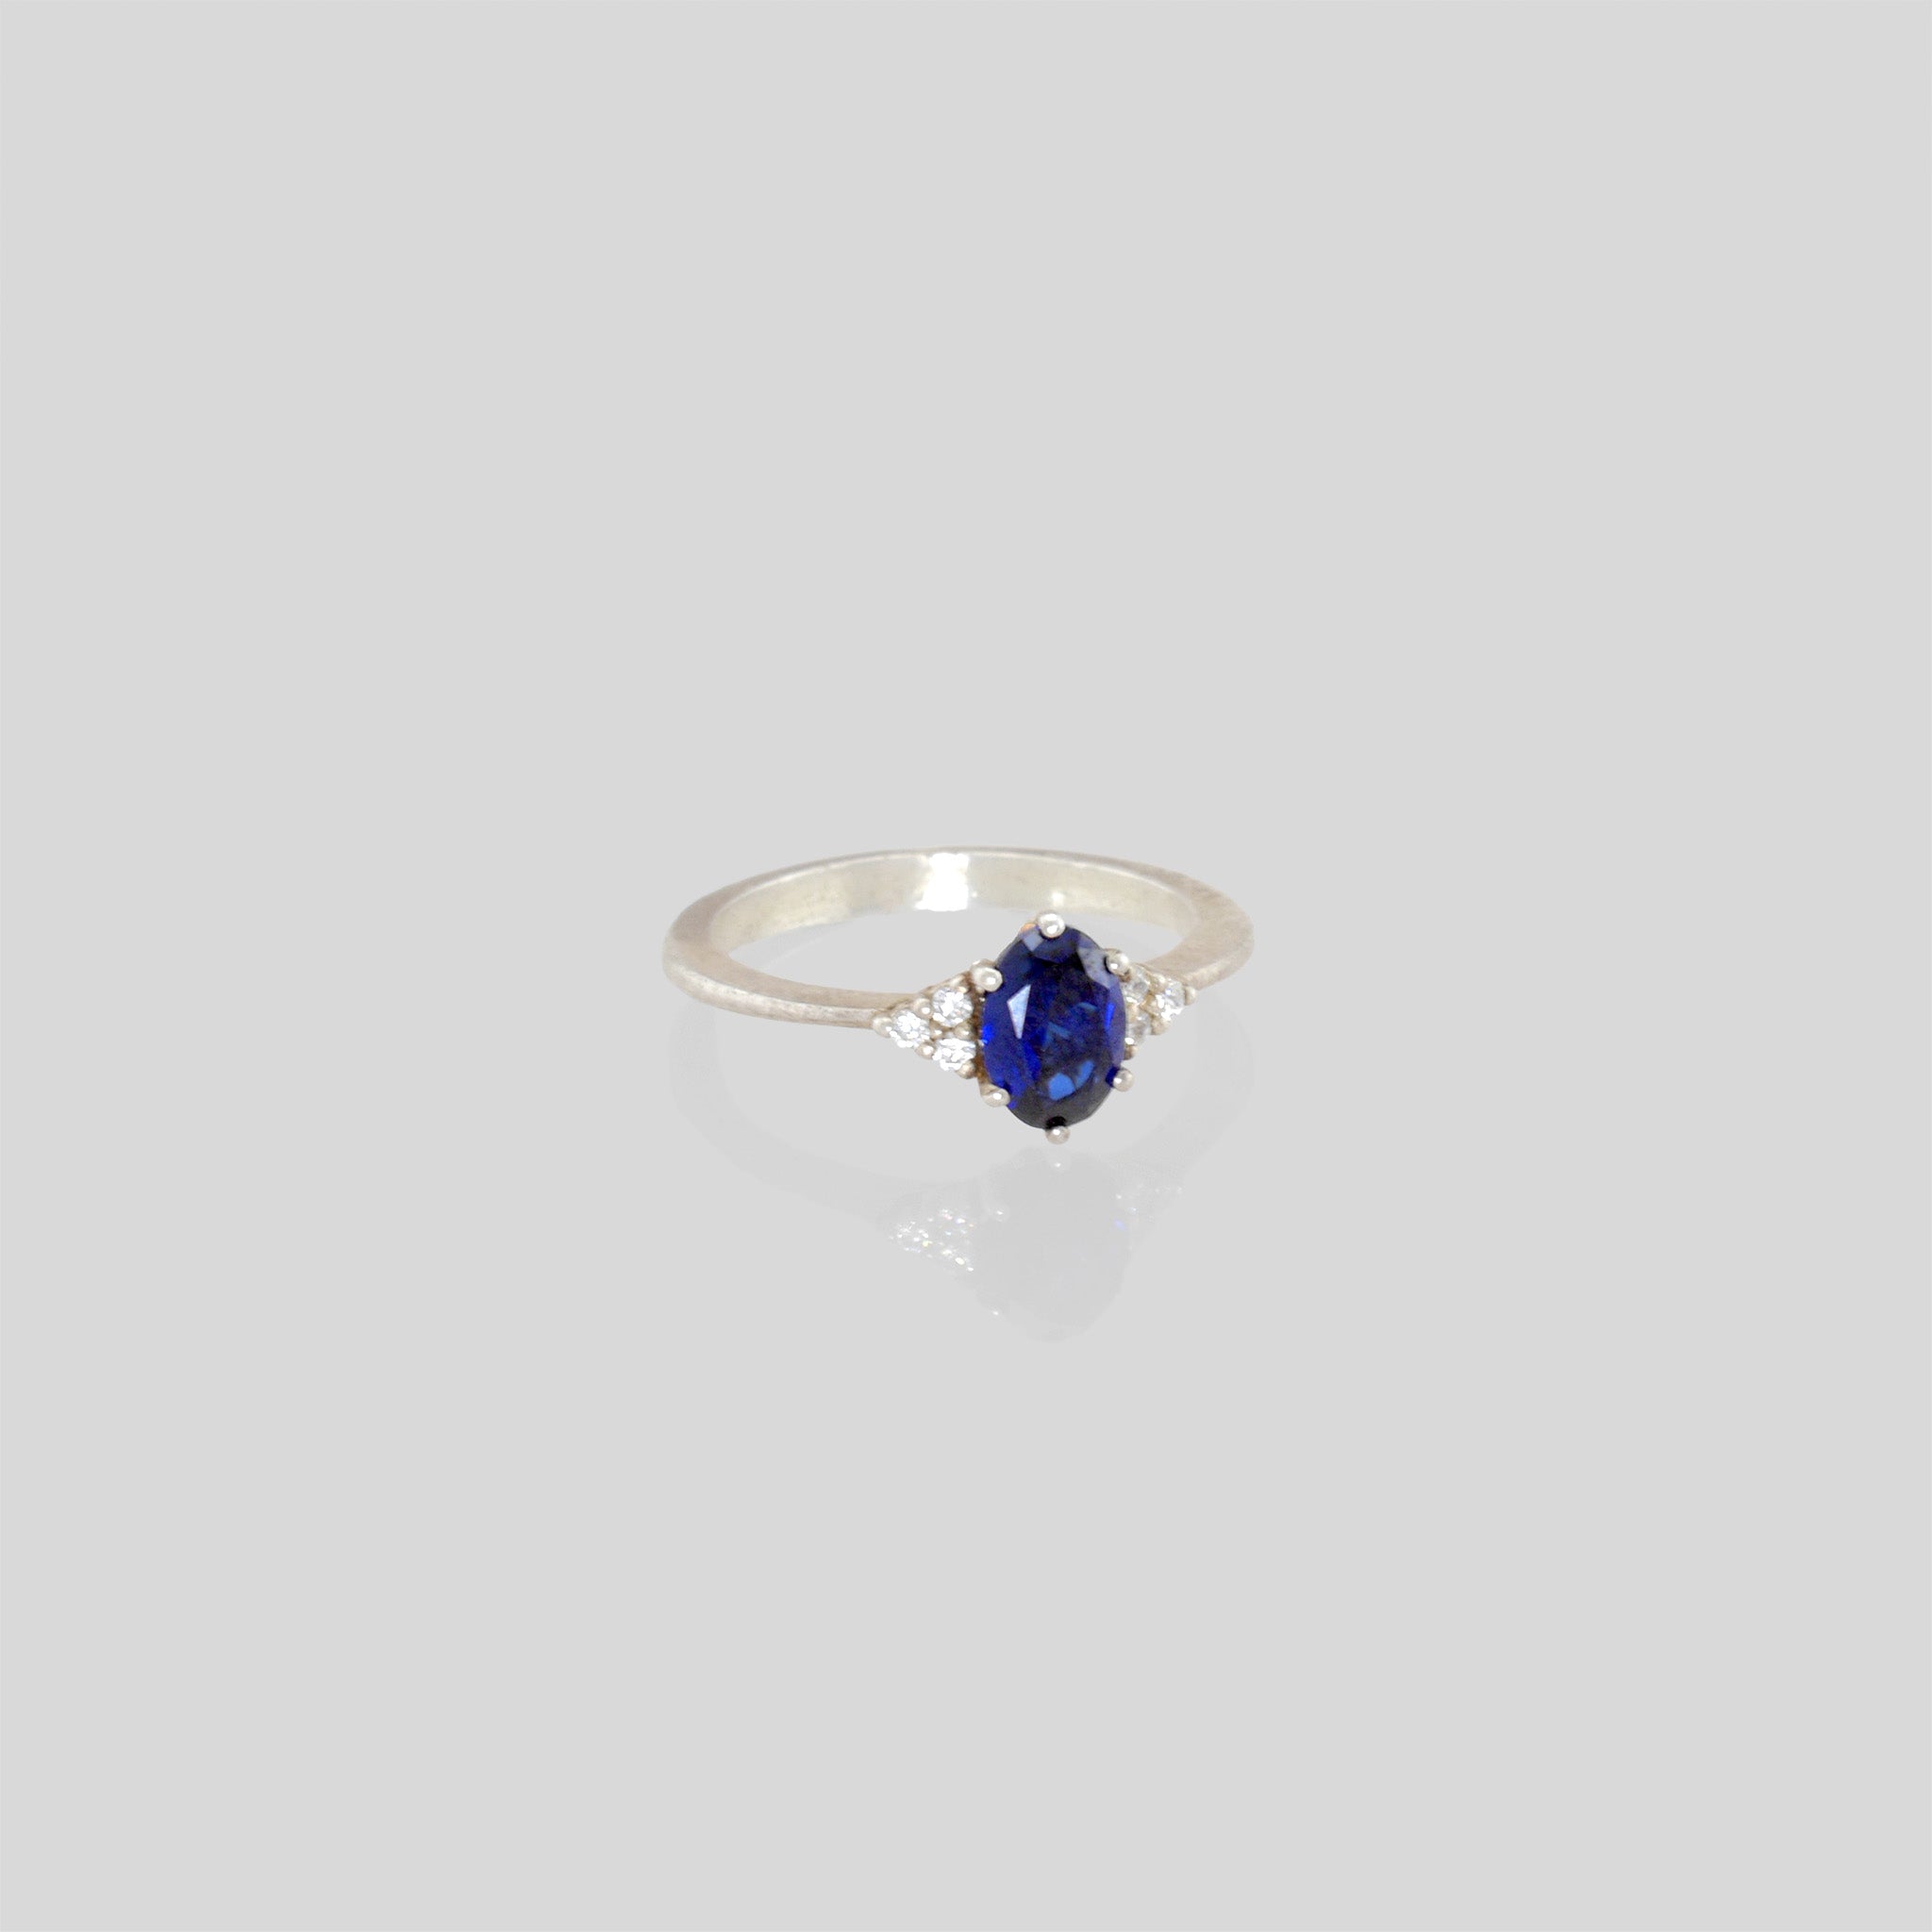 White Gold engagement ring featuring an oval central Sapphire and three dainty Diamonds on each side, offering timeless elegance with added sparkle.